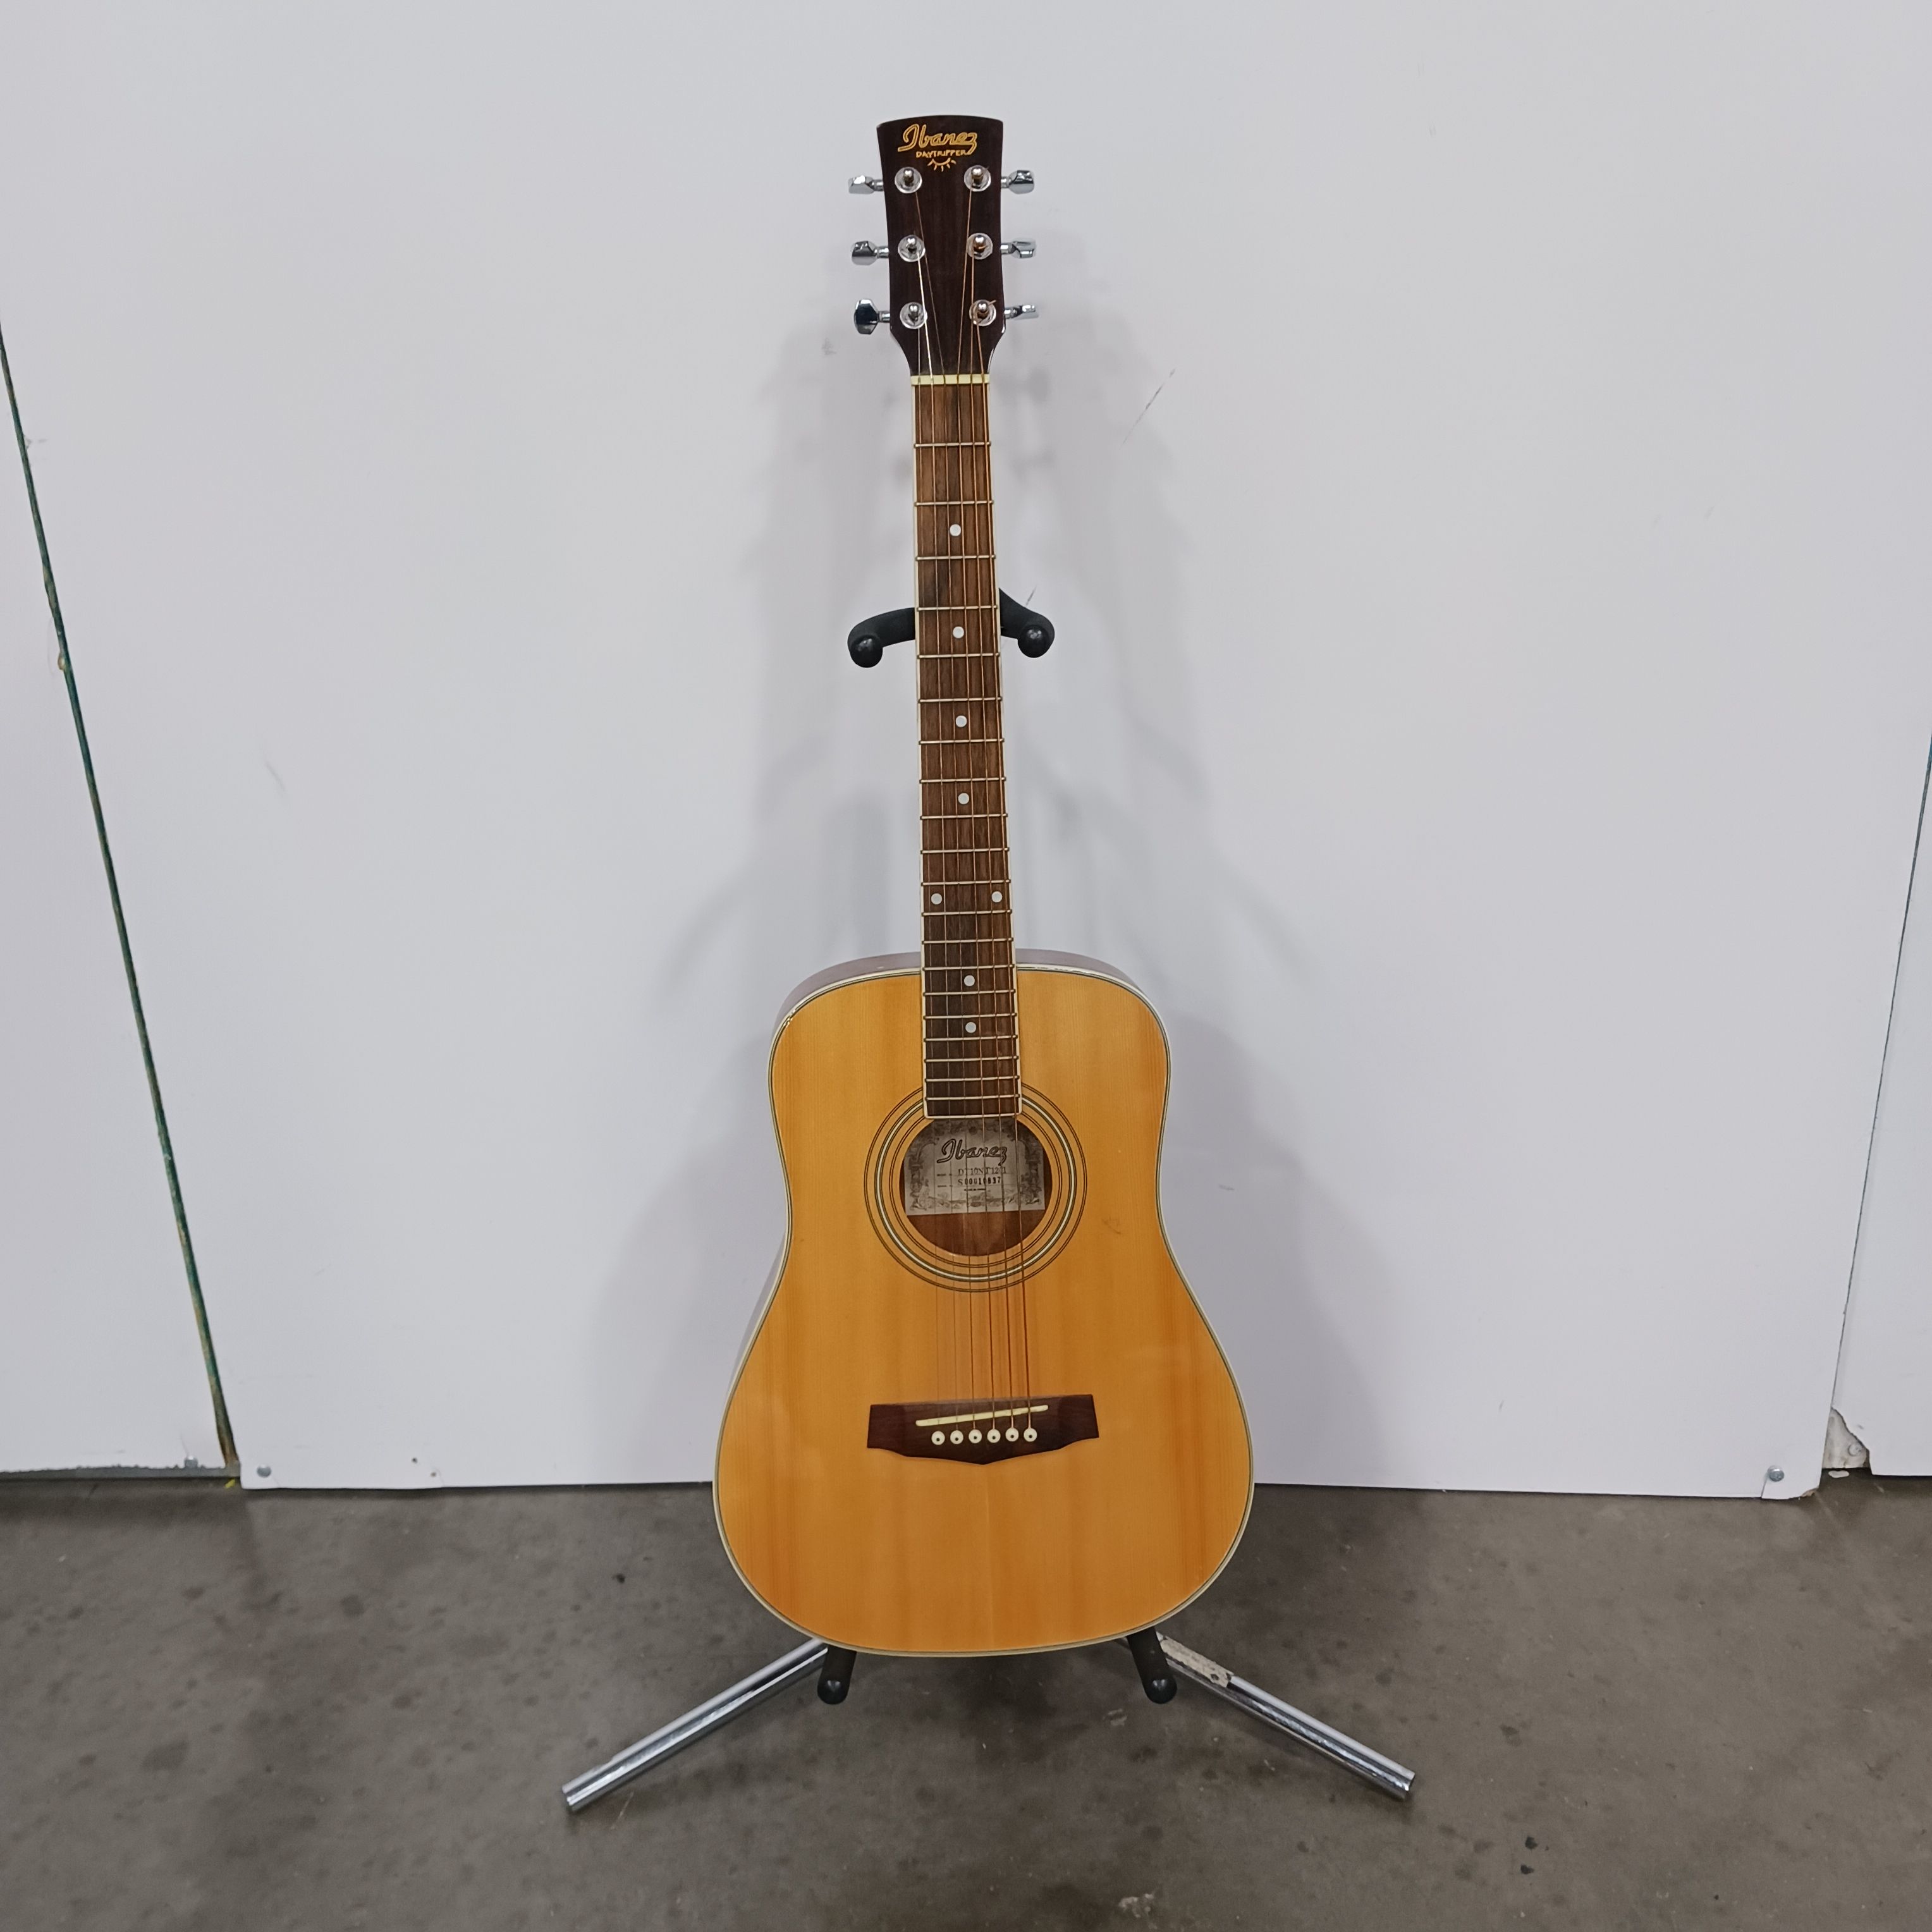 Buy Ibanez Daytripper DT10NT Acoustic Guitar for USD 174.00 | GoodwillFinds